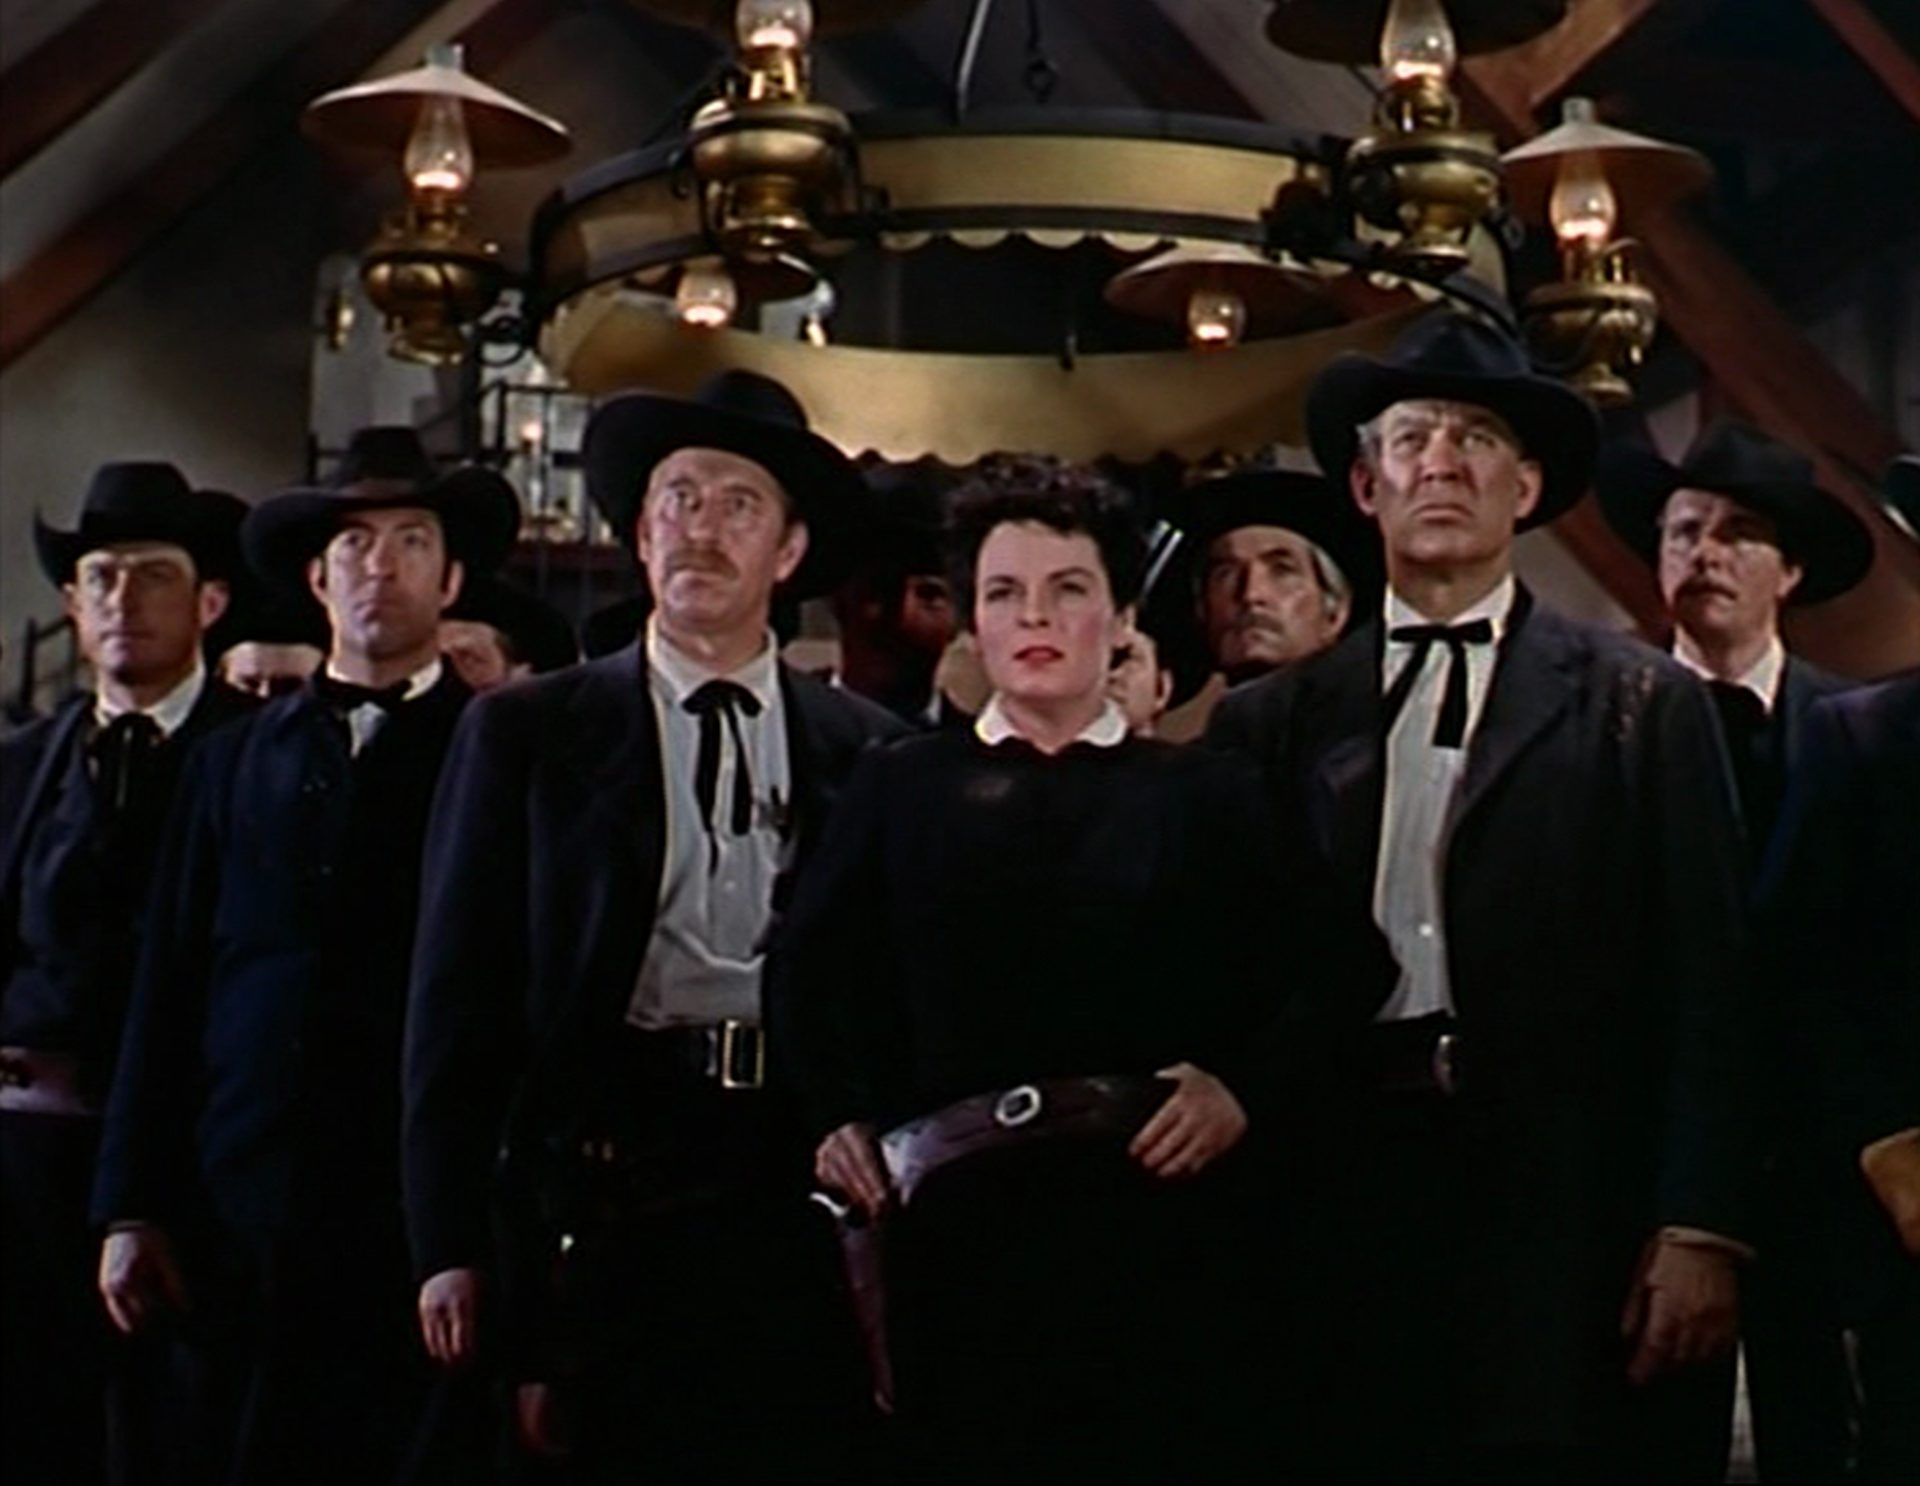 Mercedes McCambridge as Emma Small in a militant pose at the head of an otherwise all-male group under a chandelier.